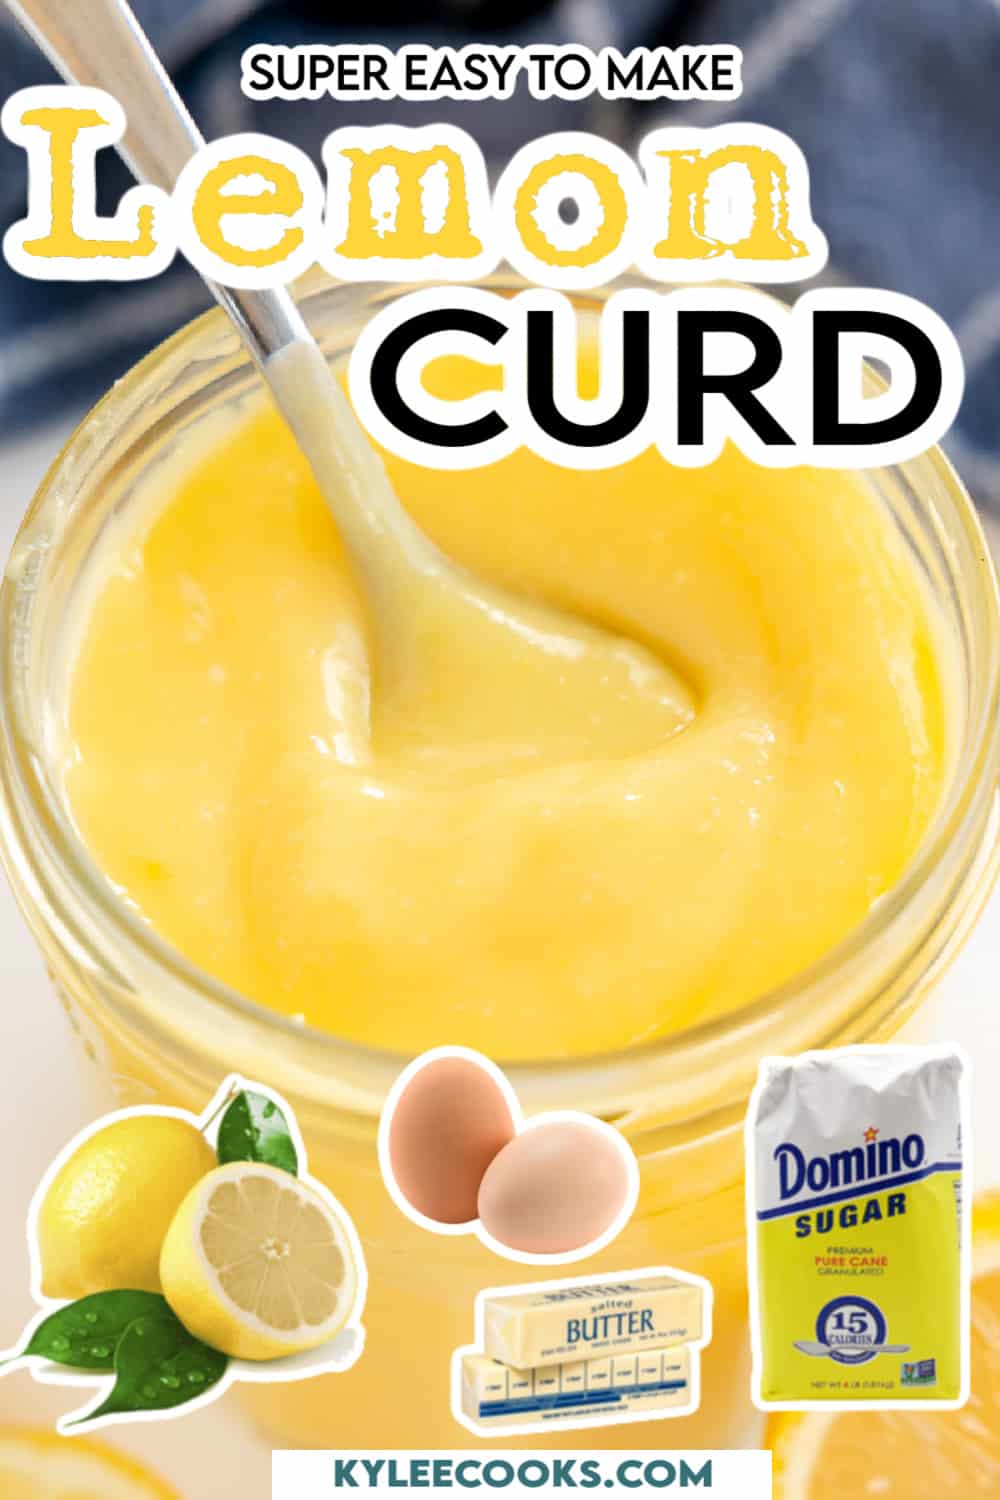 homemade lemon curd in a jar with recipe name and ingredients overlaid in text.